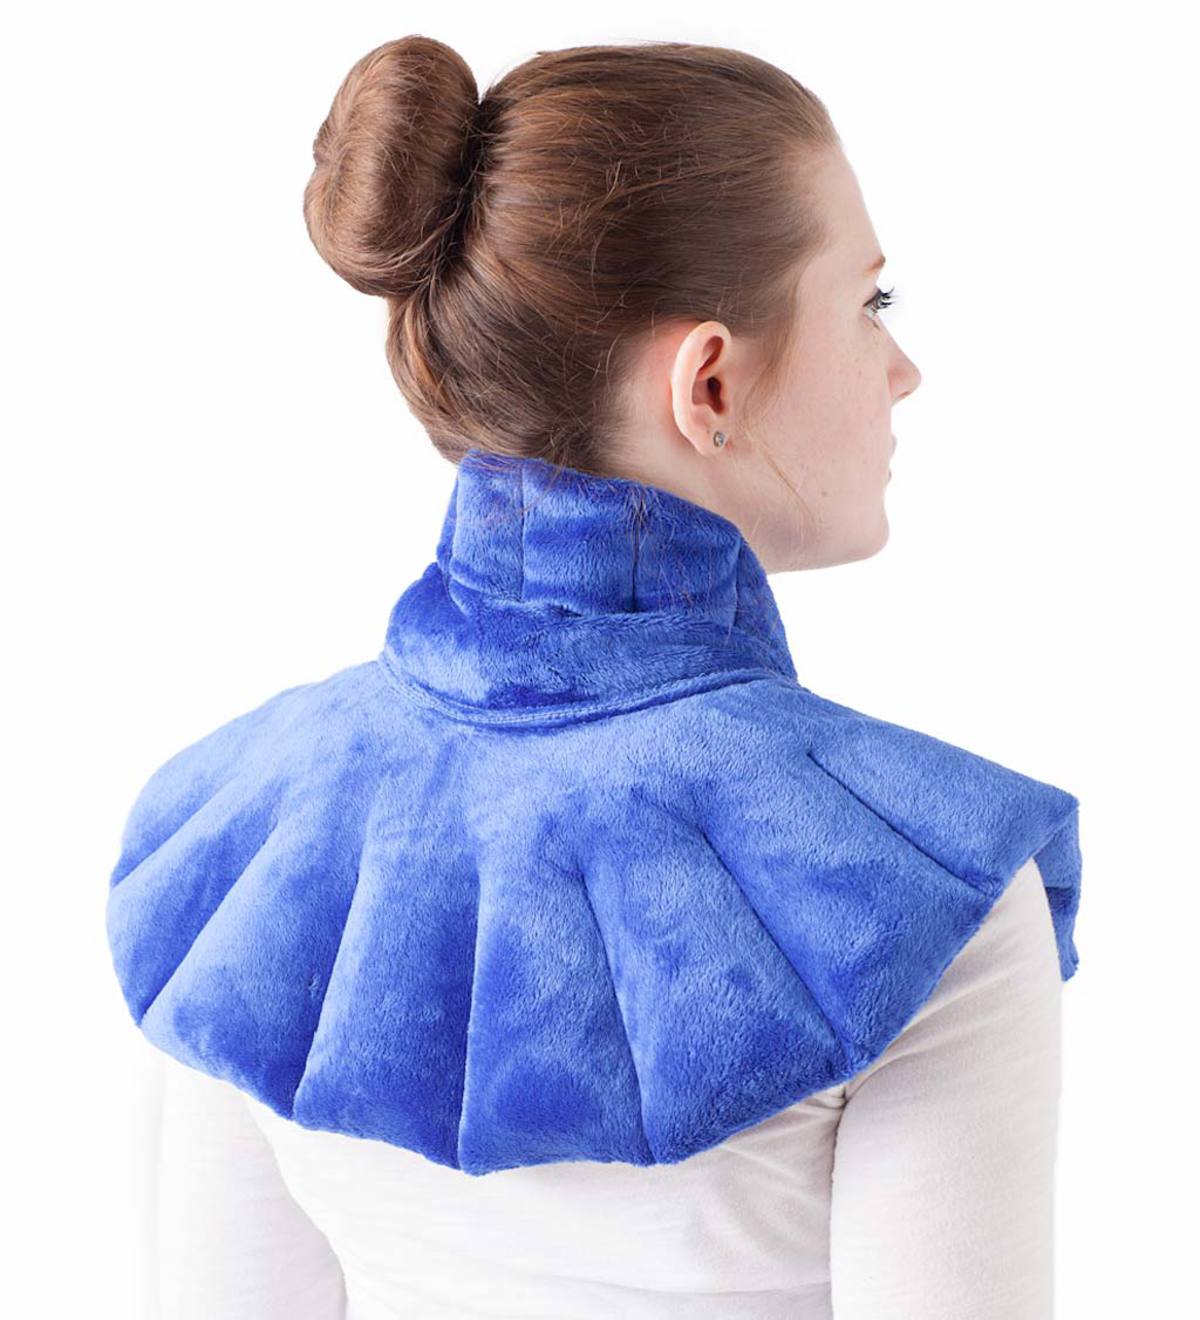 American-Made Soothing Herbal Aromatherapy Neck, Shoulder and Back Wrap